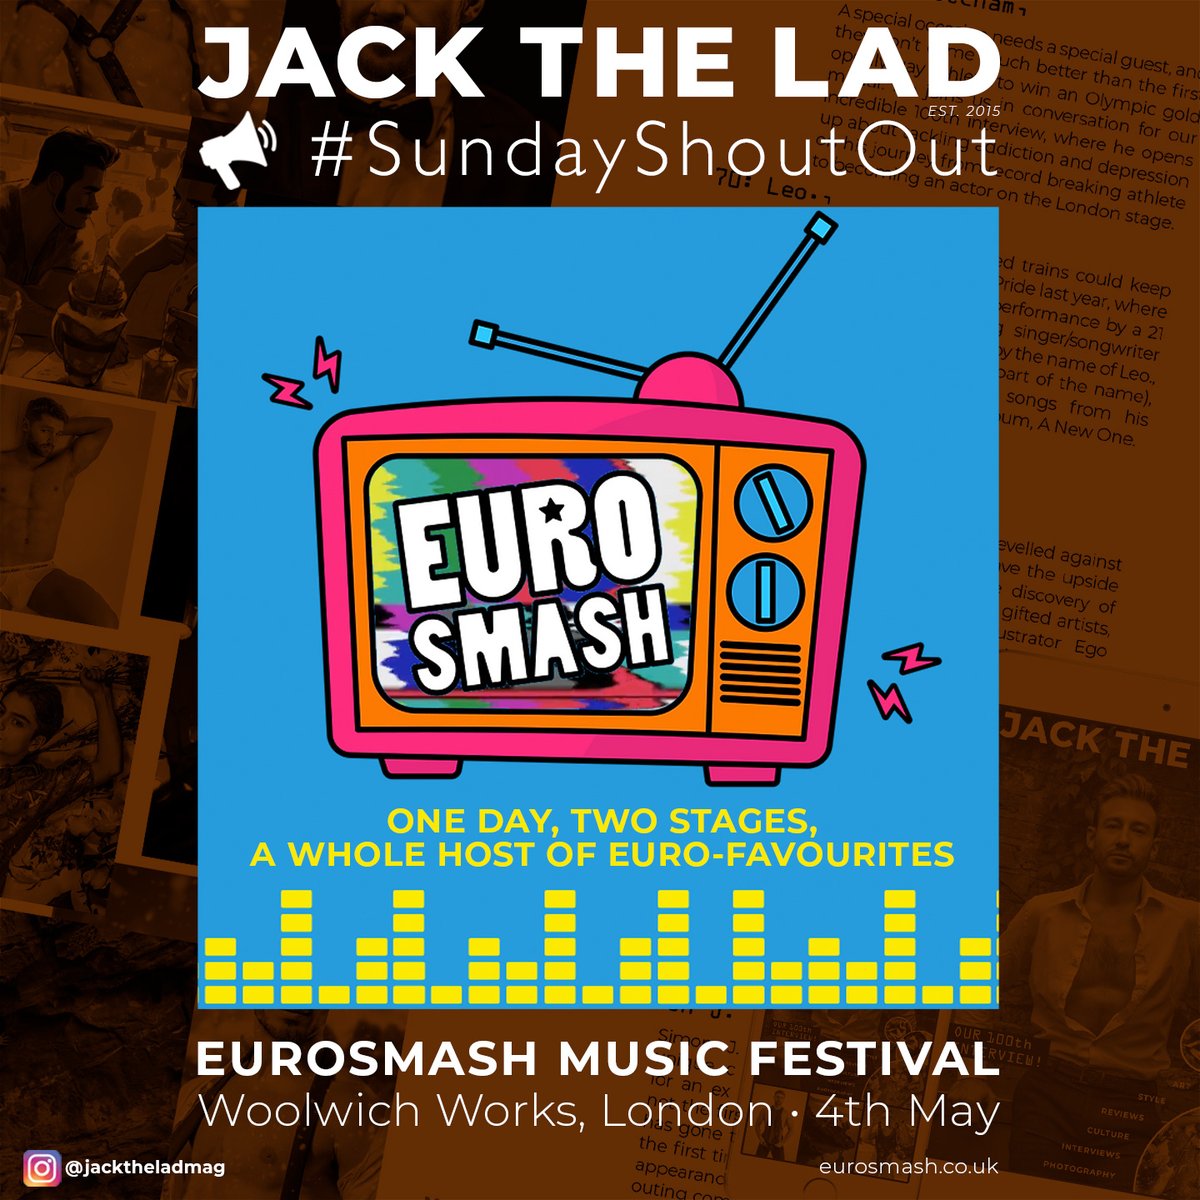 #SundayShoutout Are you Eurovision ready? Get the party started @eurosmashfest. A day of Euro-favourites @woolwich_works including @planetjedward, @KatrinasWeb, @Subwoolferband as well as @JackTheLadMag featured @linuskarp & @suddenlyjoseph See you there! woolwich.works/book/instance/…